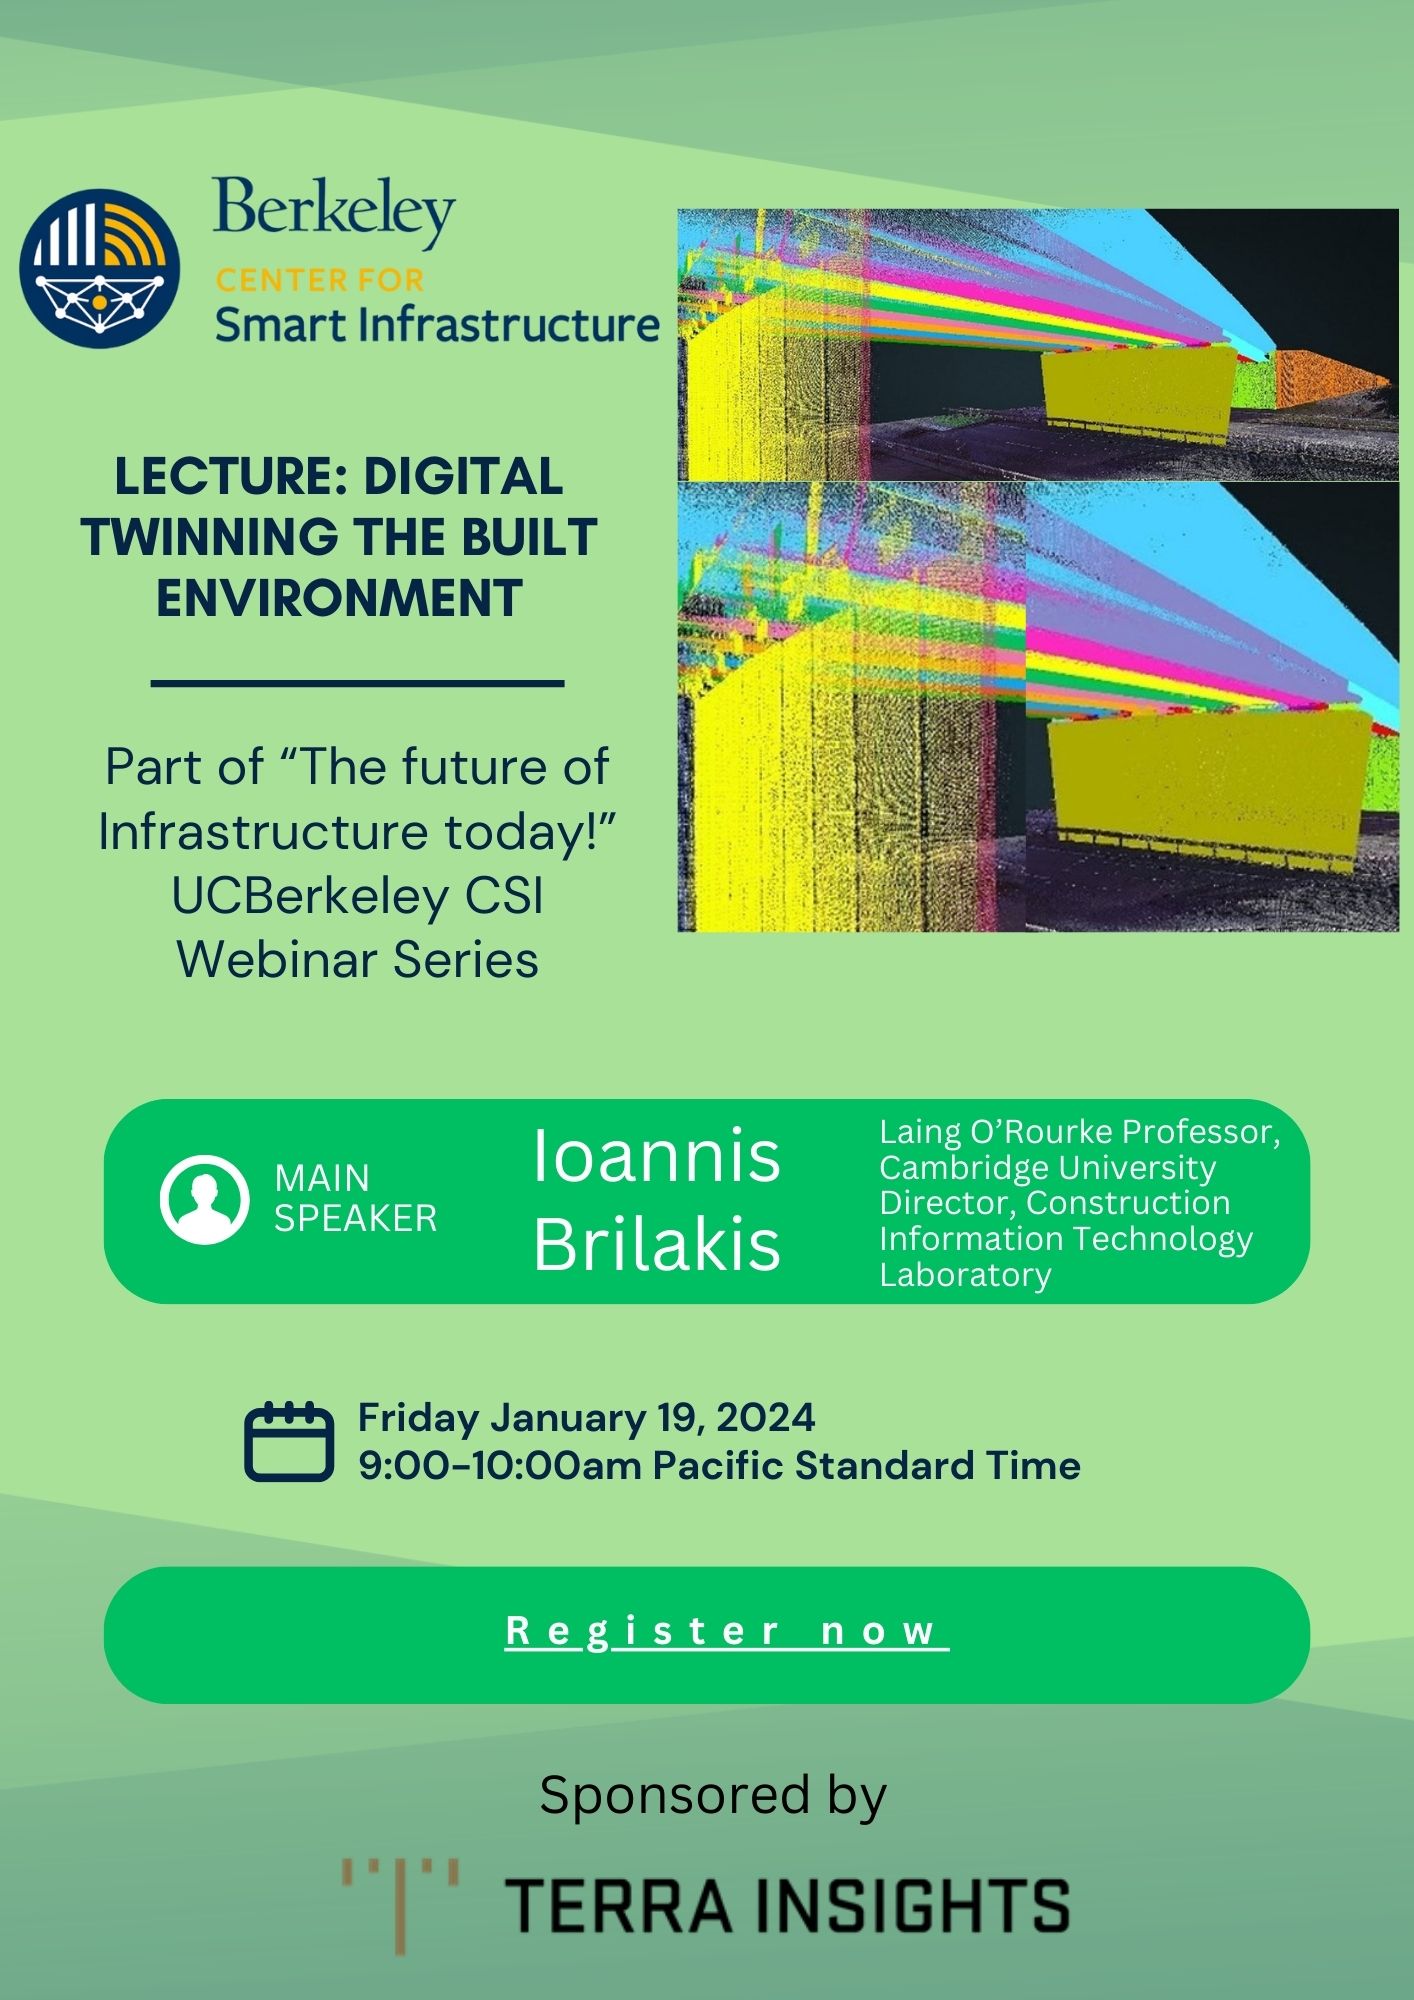 "Digital Twinning the Built Environment", part of "The future of Infrastructure today!" webinar series